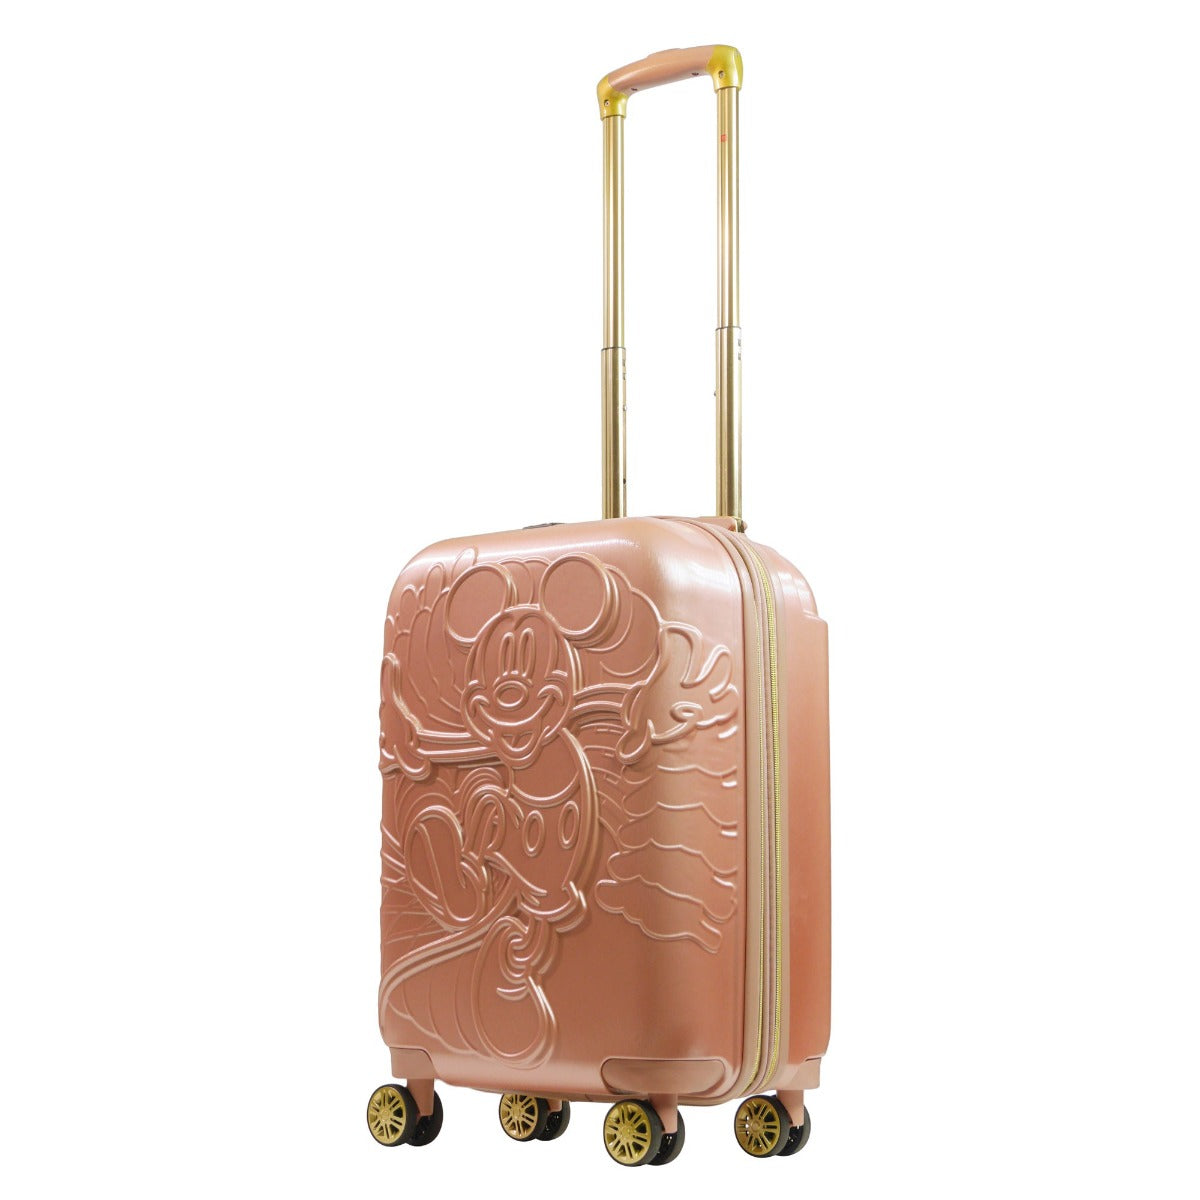 Ful Embossed Disney Mickey Mouse hardsided spinner suitcase 22" carry on luggage rose gold expandable 2" gusset